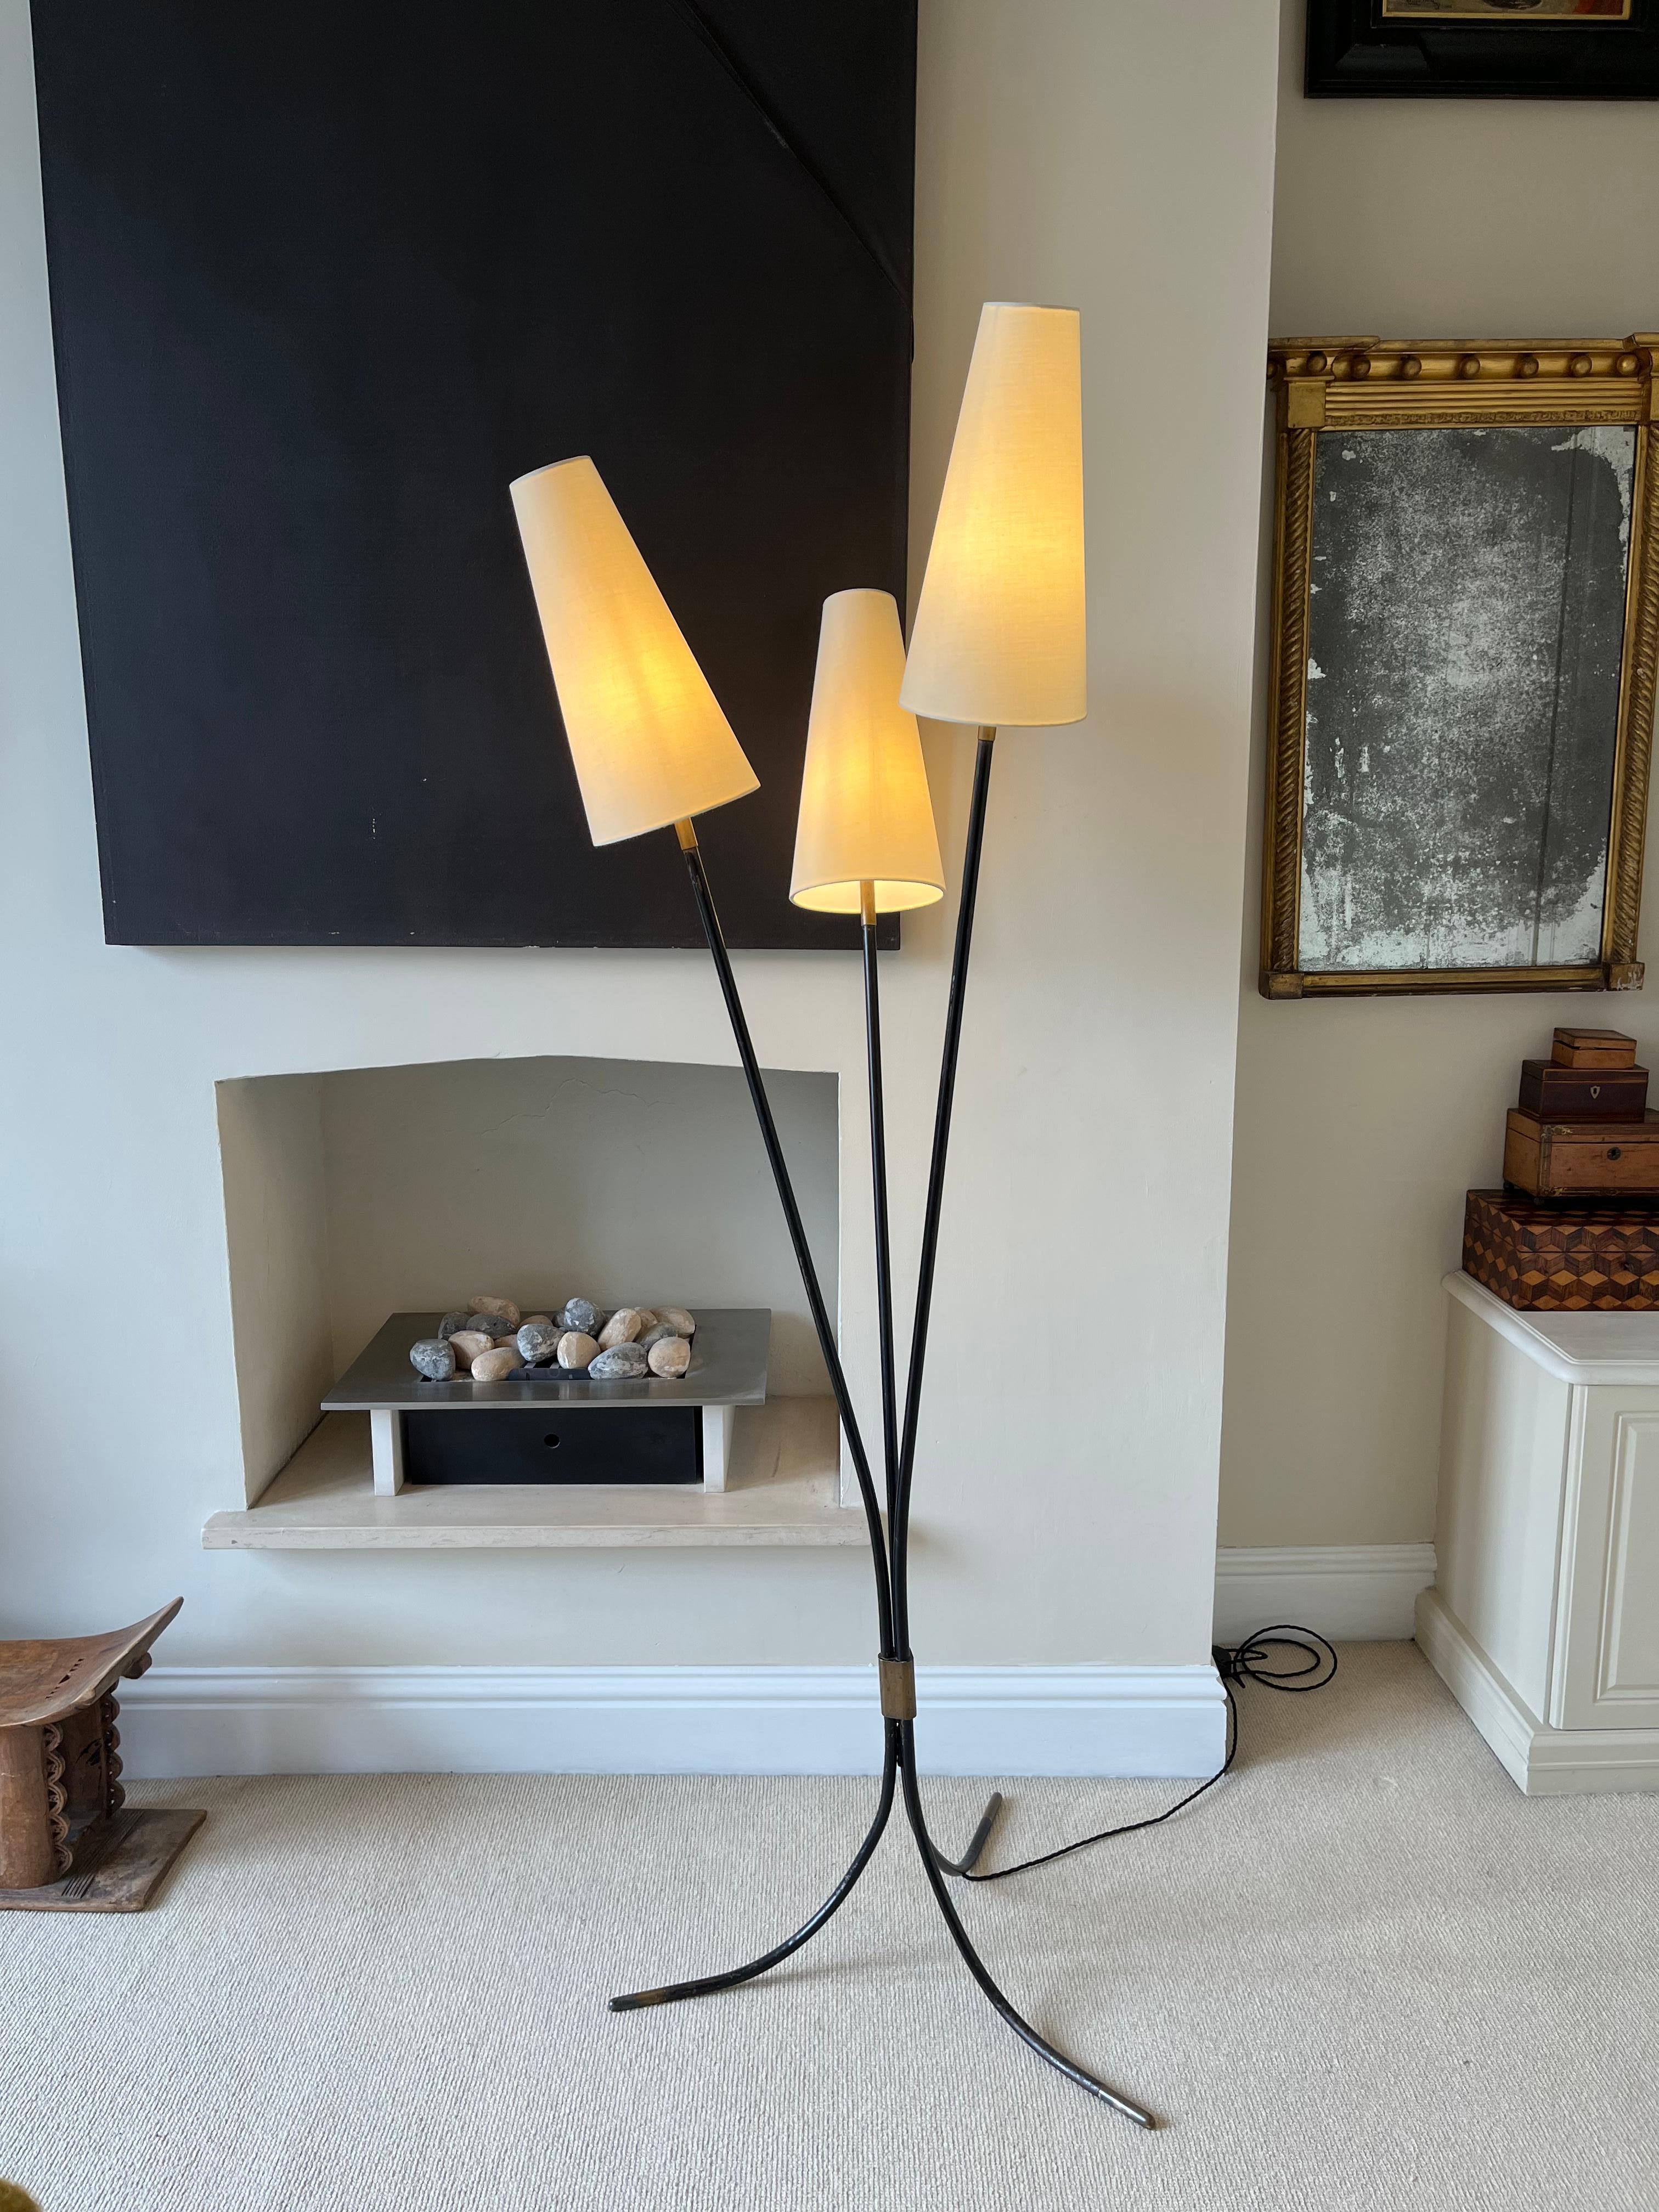 Fabulous quality French three armed floor lamp with bronze metal detail. Shades newly replaced. Lamp rewired with floor switch.